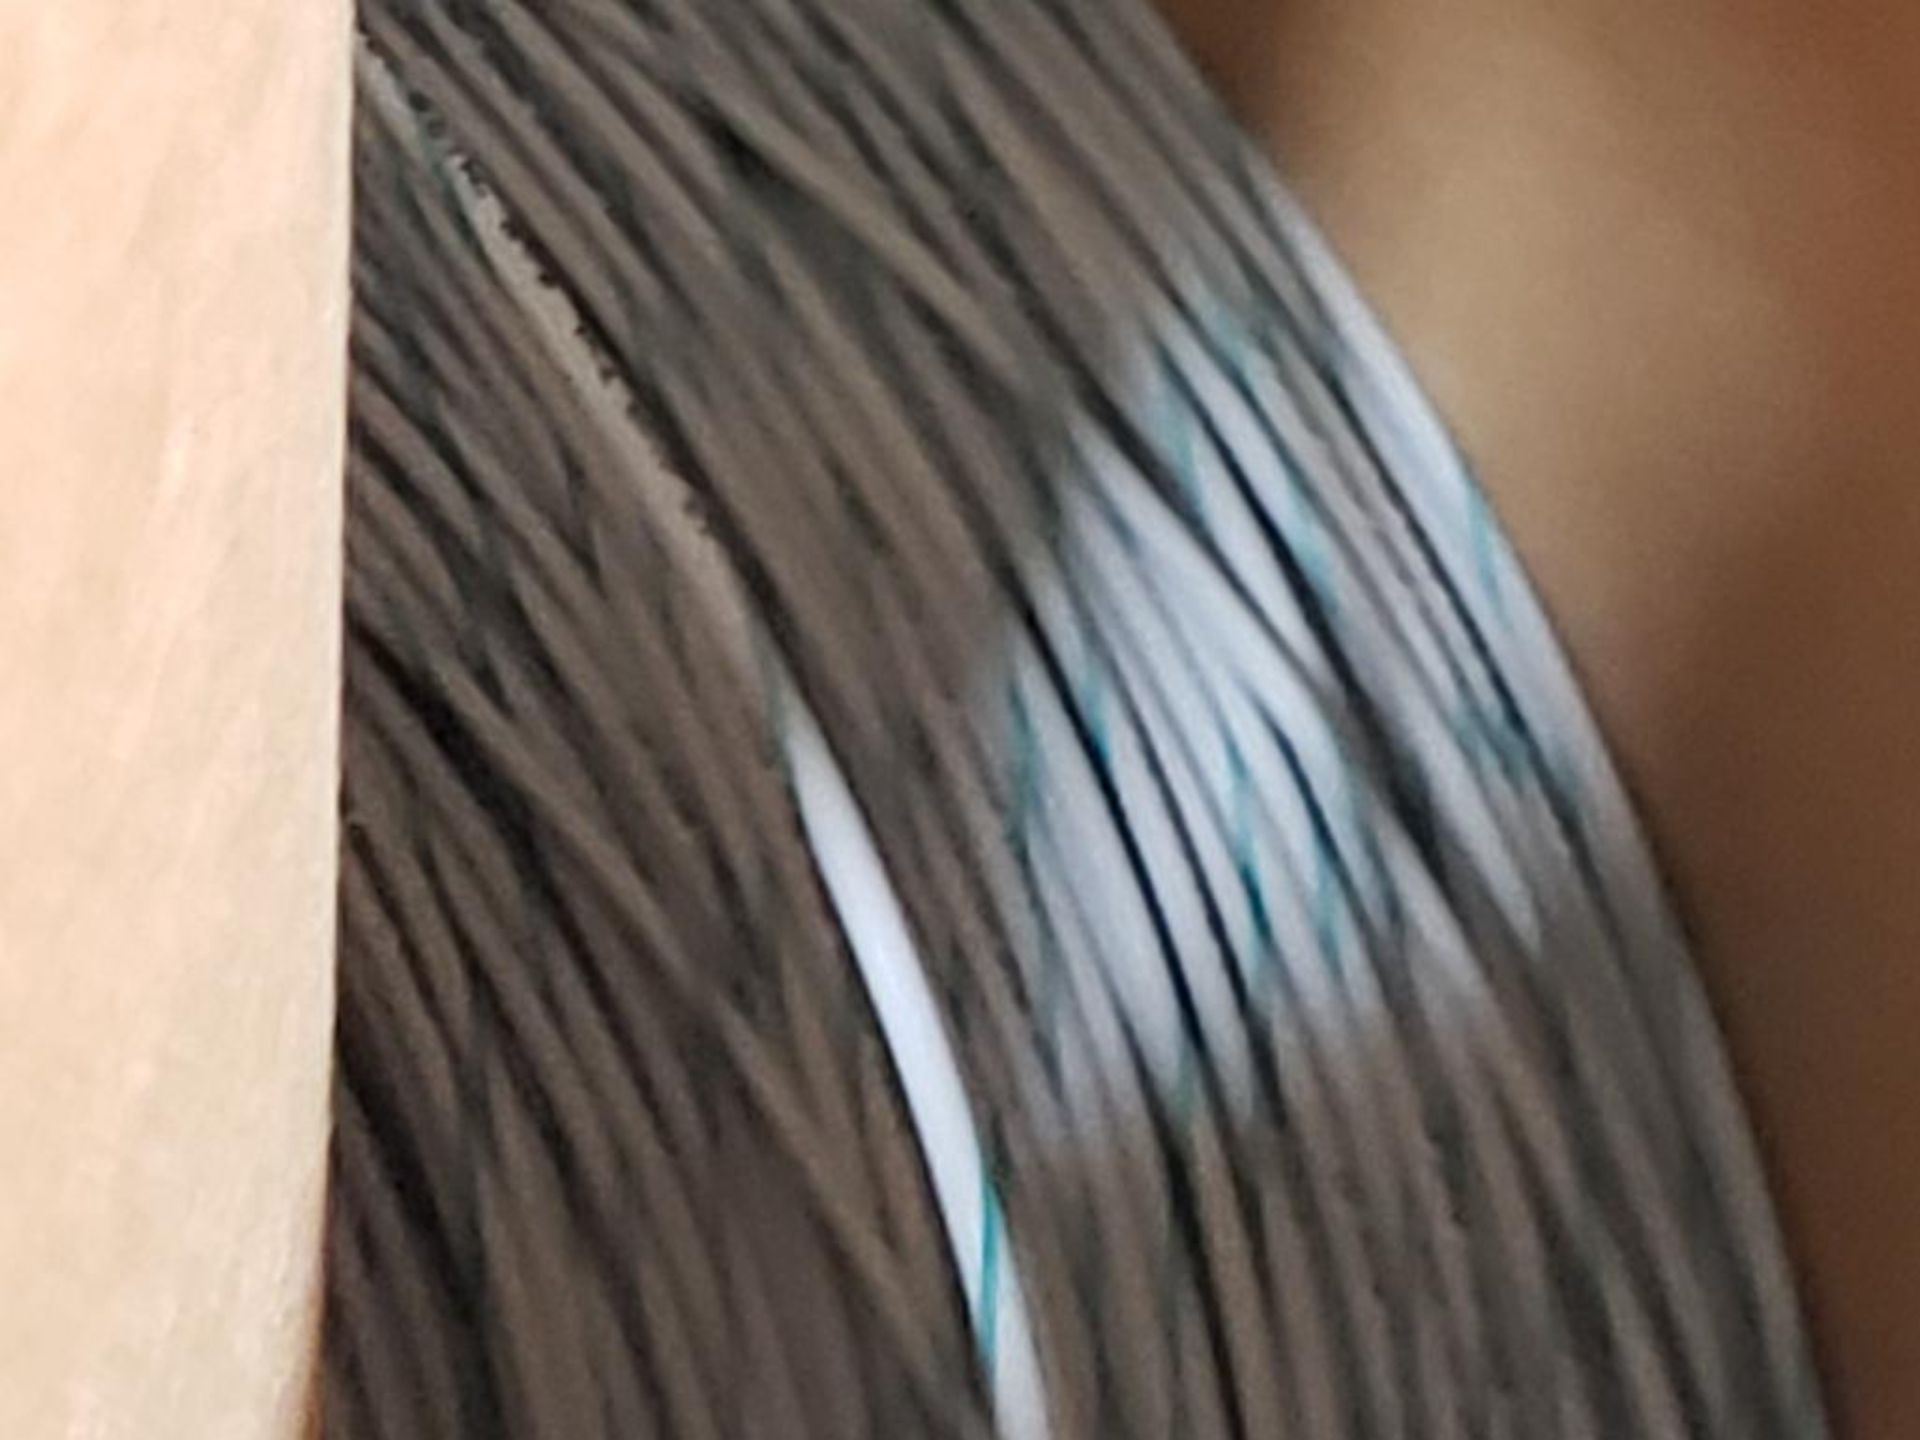 16 awg gray with green print copper wire. Gross barrel weight, 73lbs. Partial barrel. - Image 2 of 4